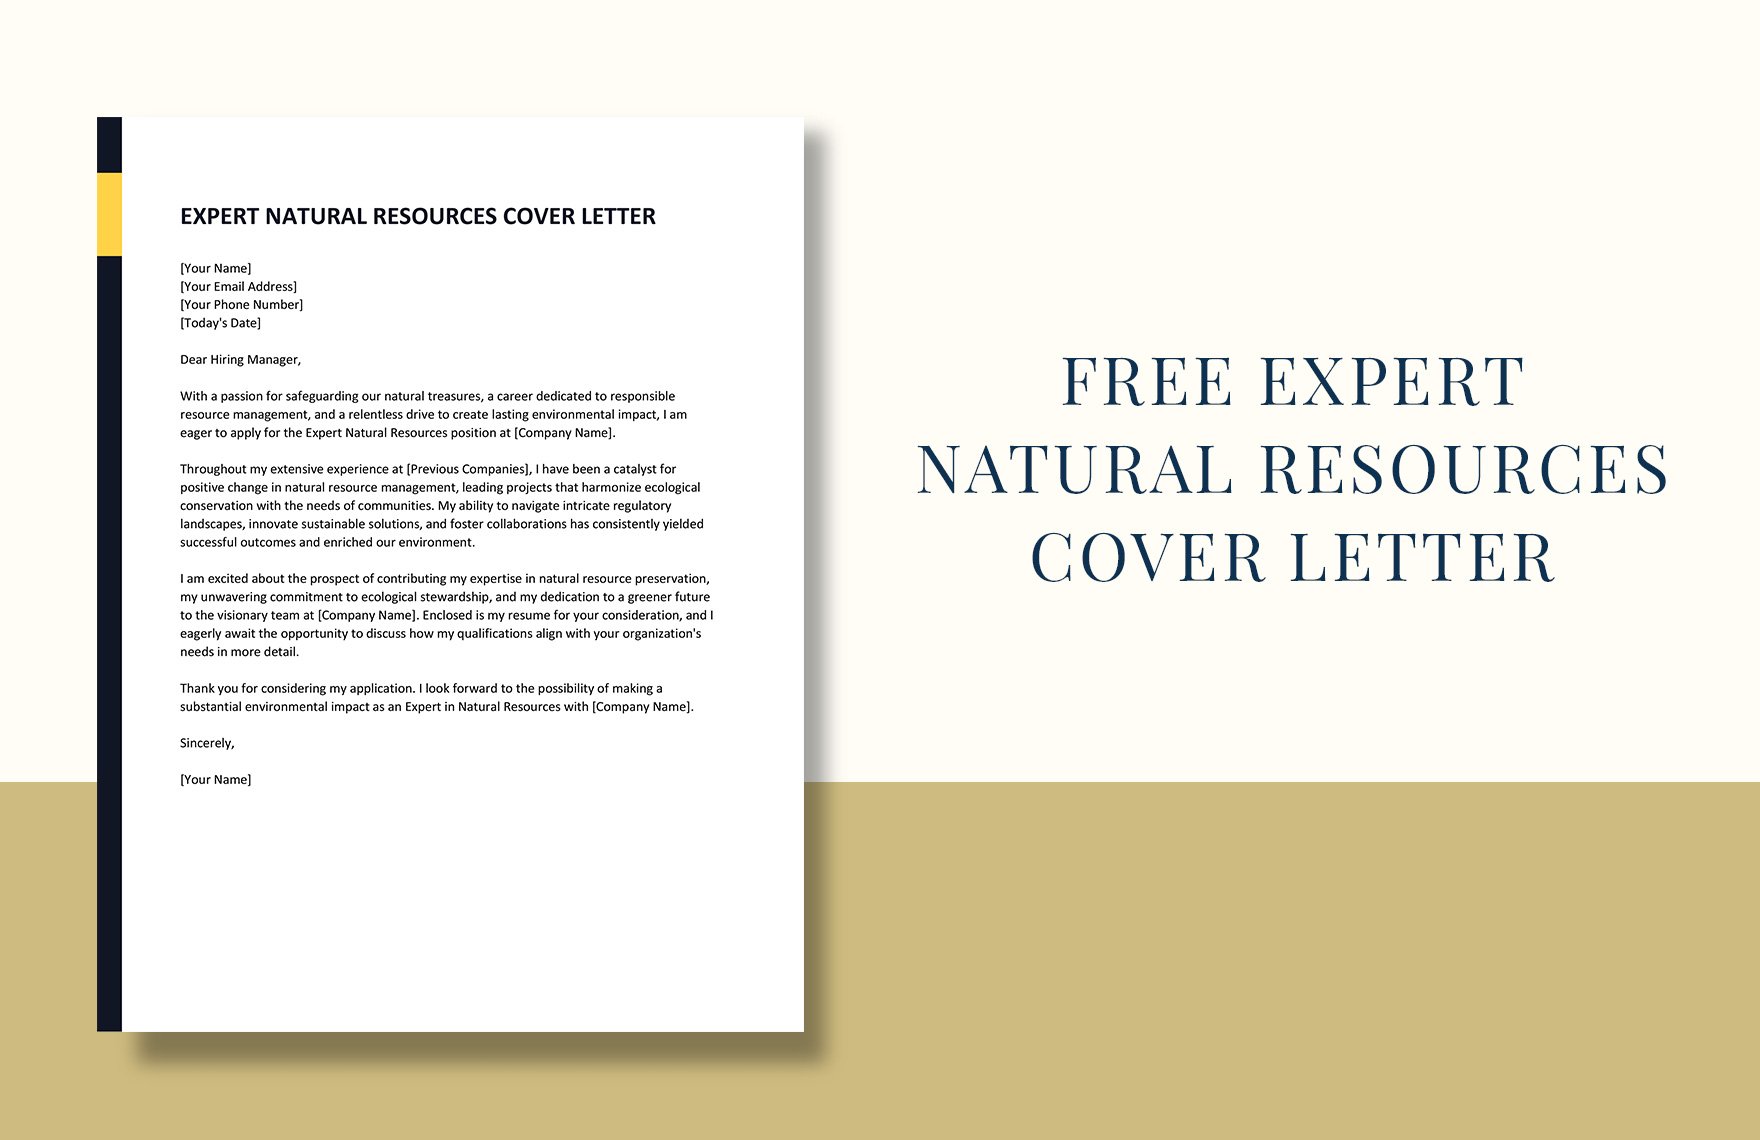 Expert Natural Resources Cover Letter in Word, Google Docs